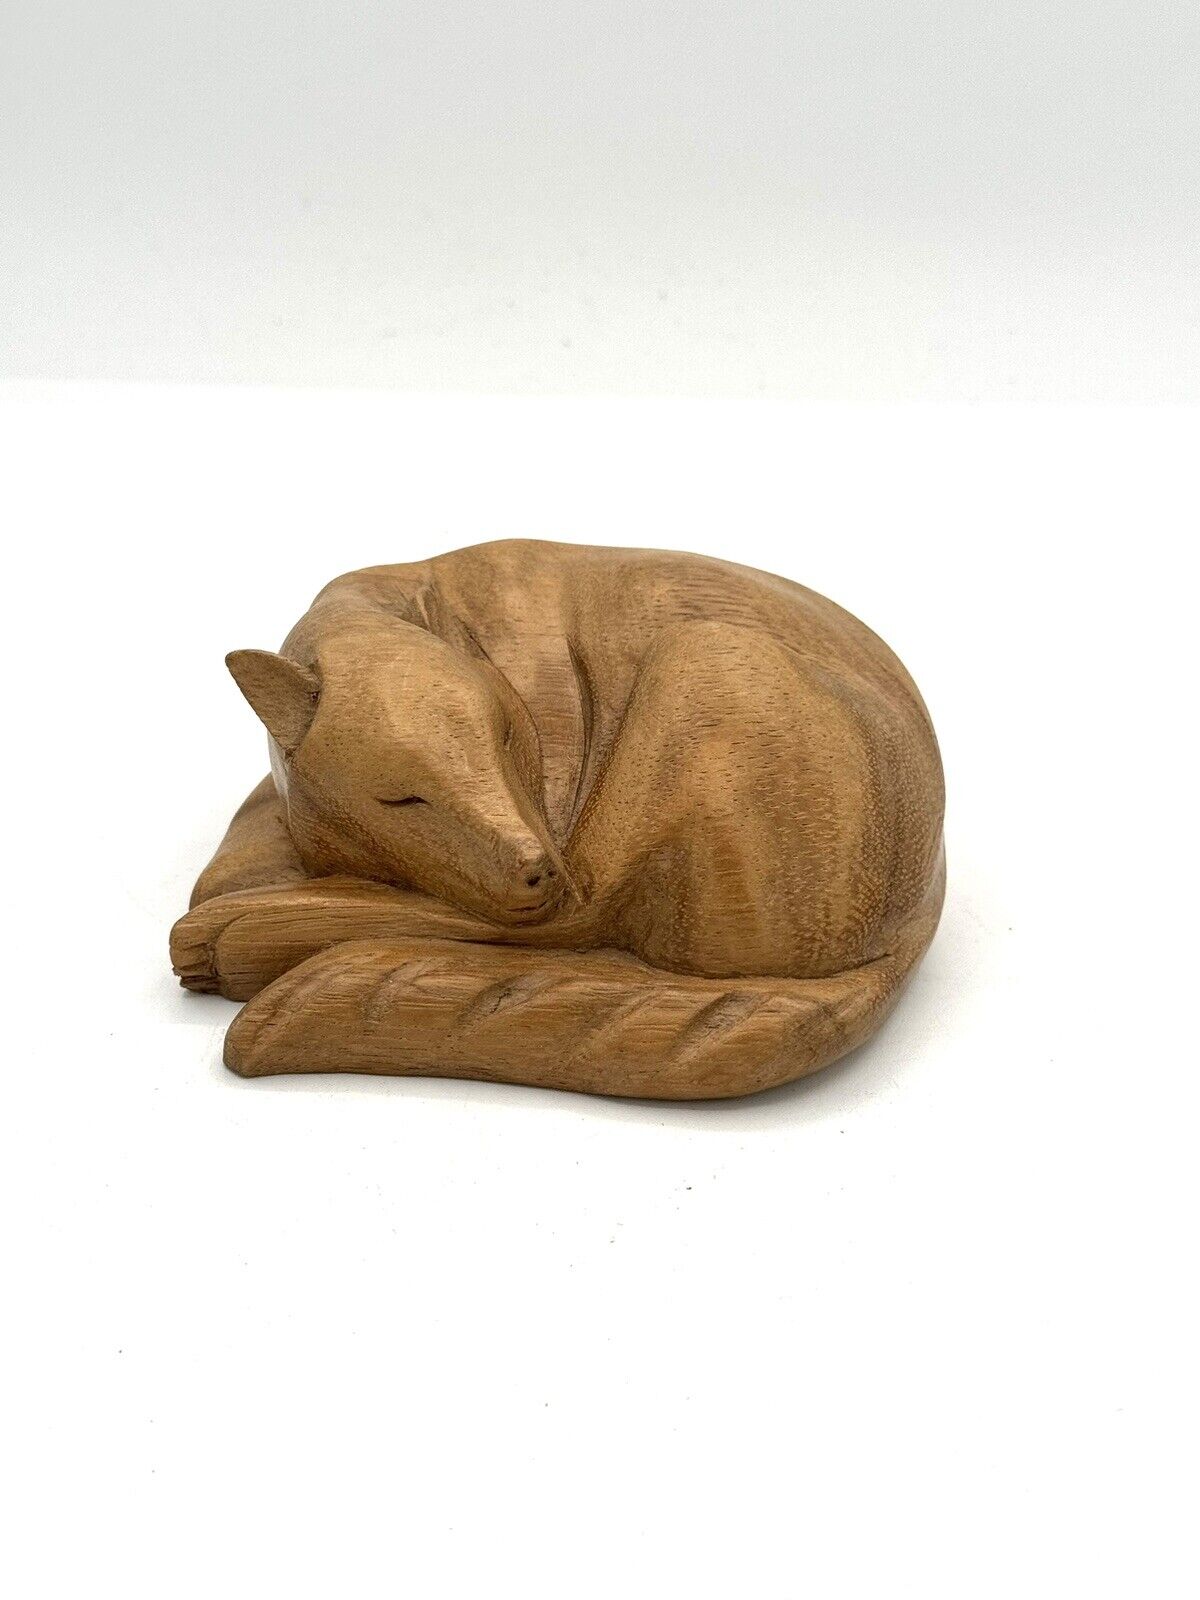 Large HAND CARVED SOLID WOOD FOX SLEEPING CURLED UP 4.5”x4”